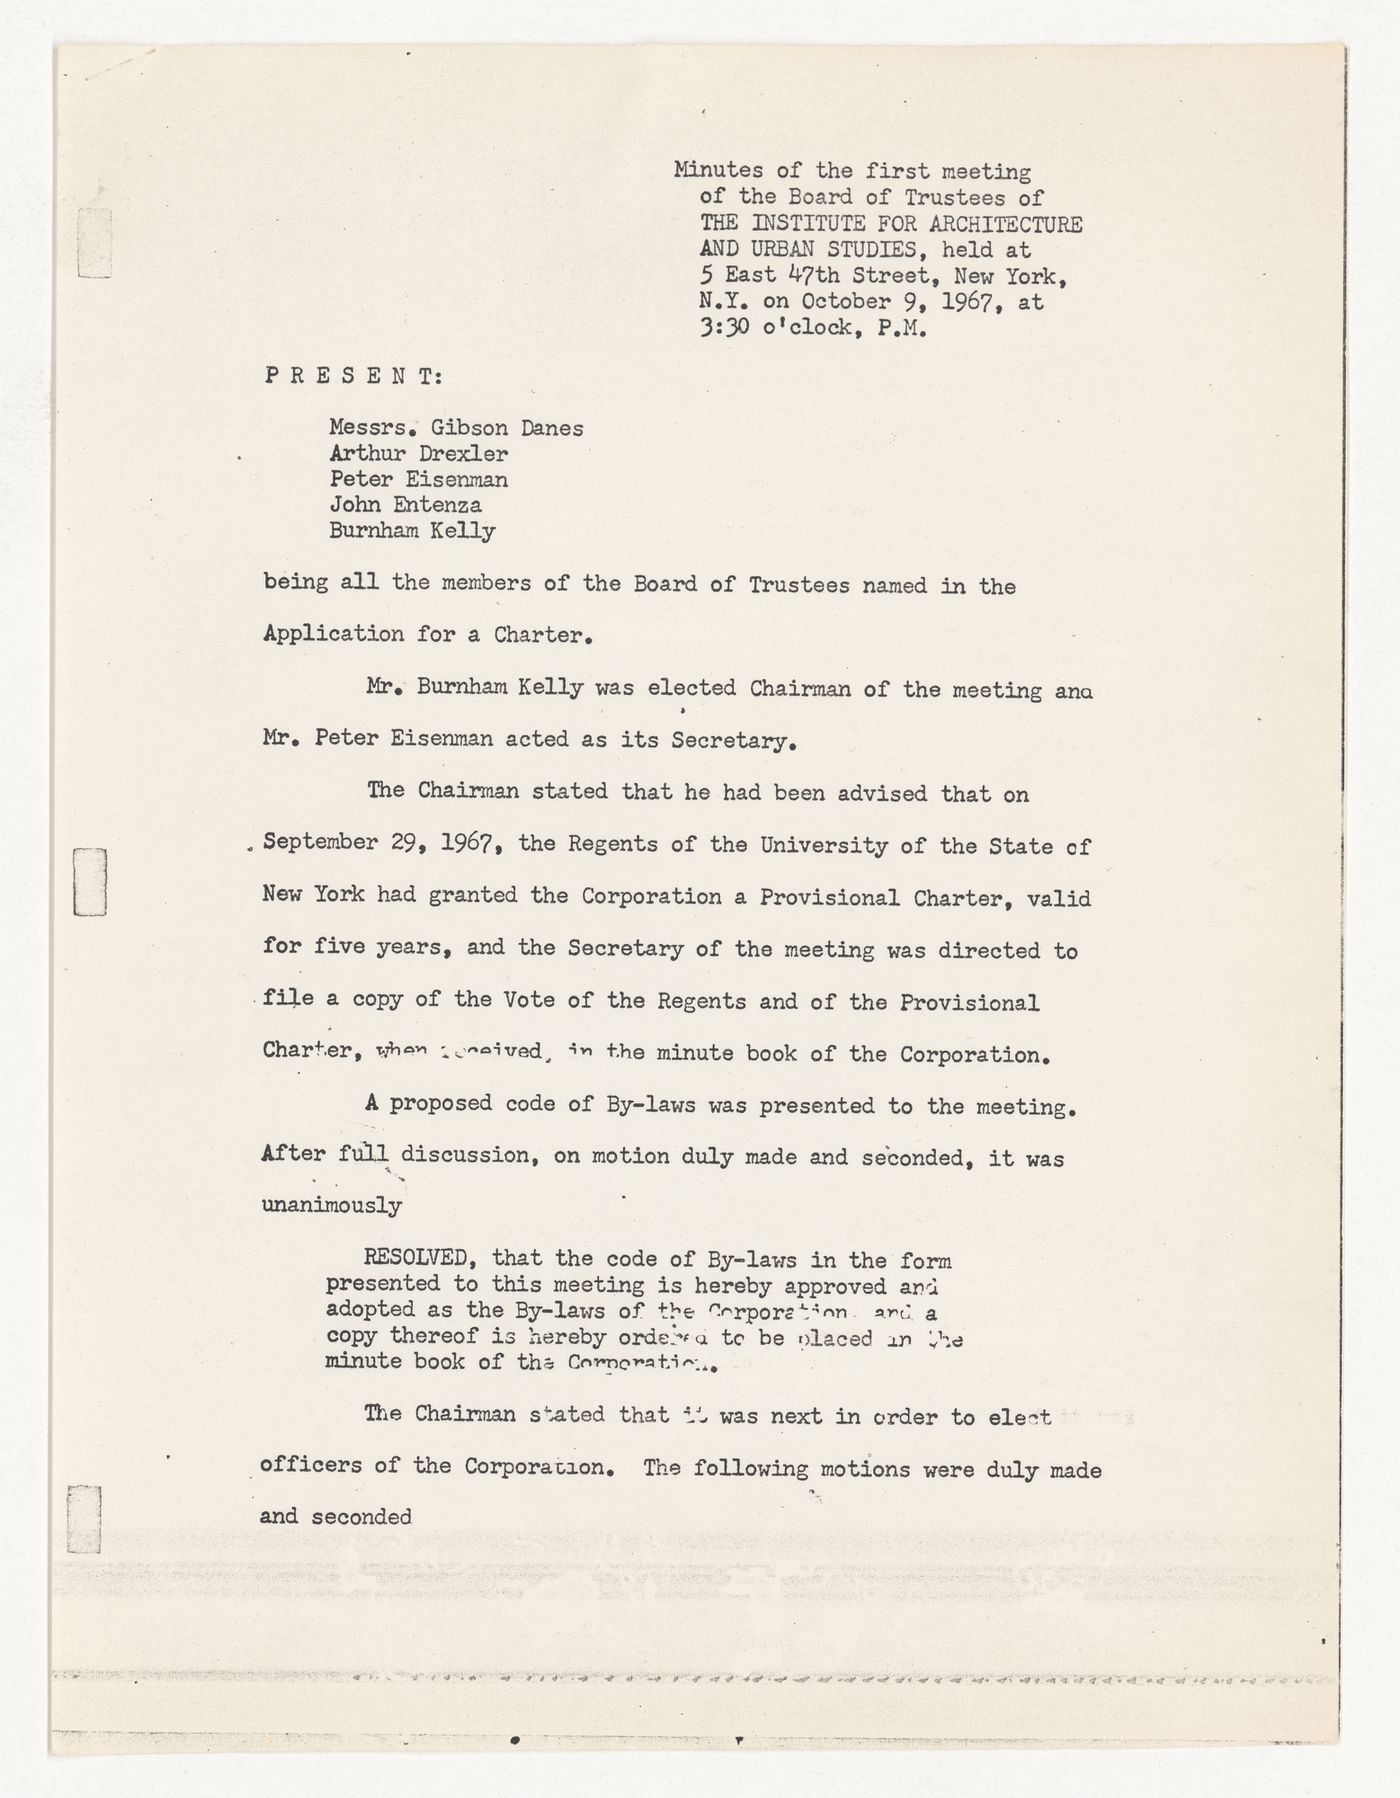 Minutes of the first meeting of the Board of Trustees with attached proposed budget for July 1967 to July 1968